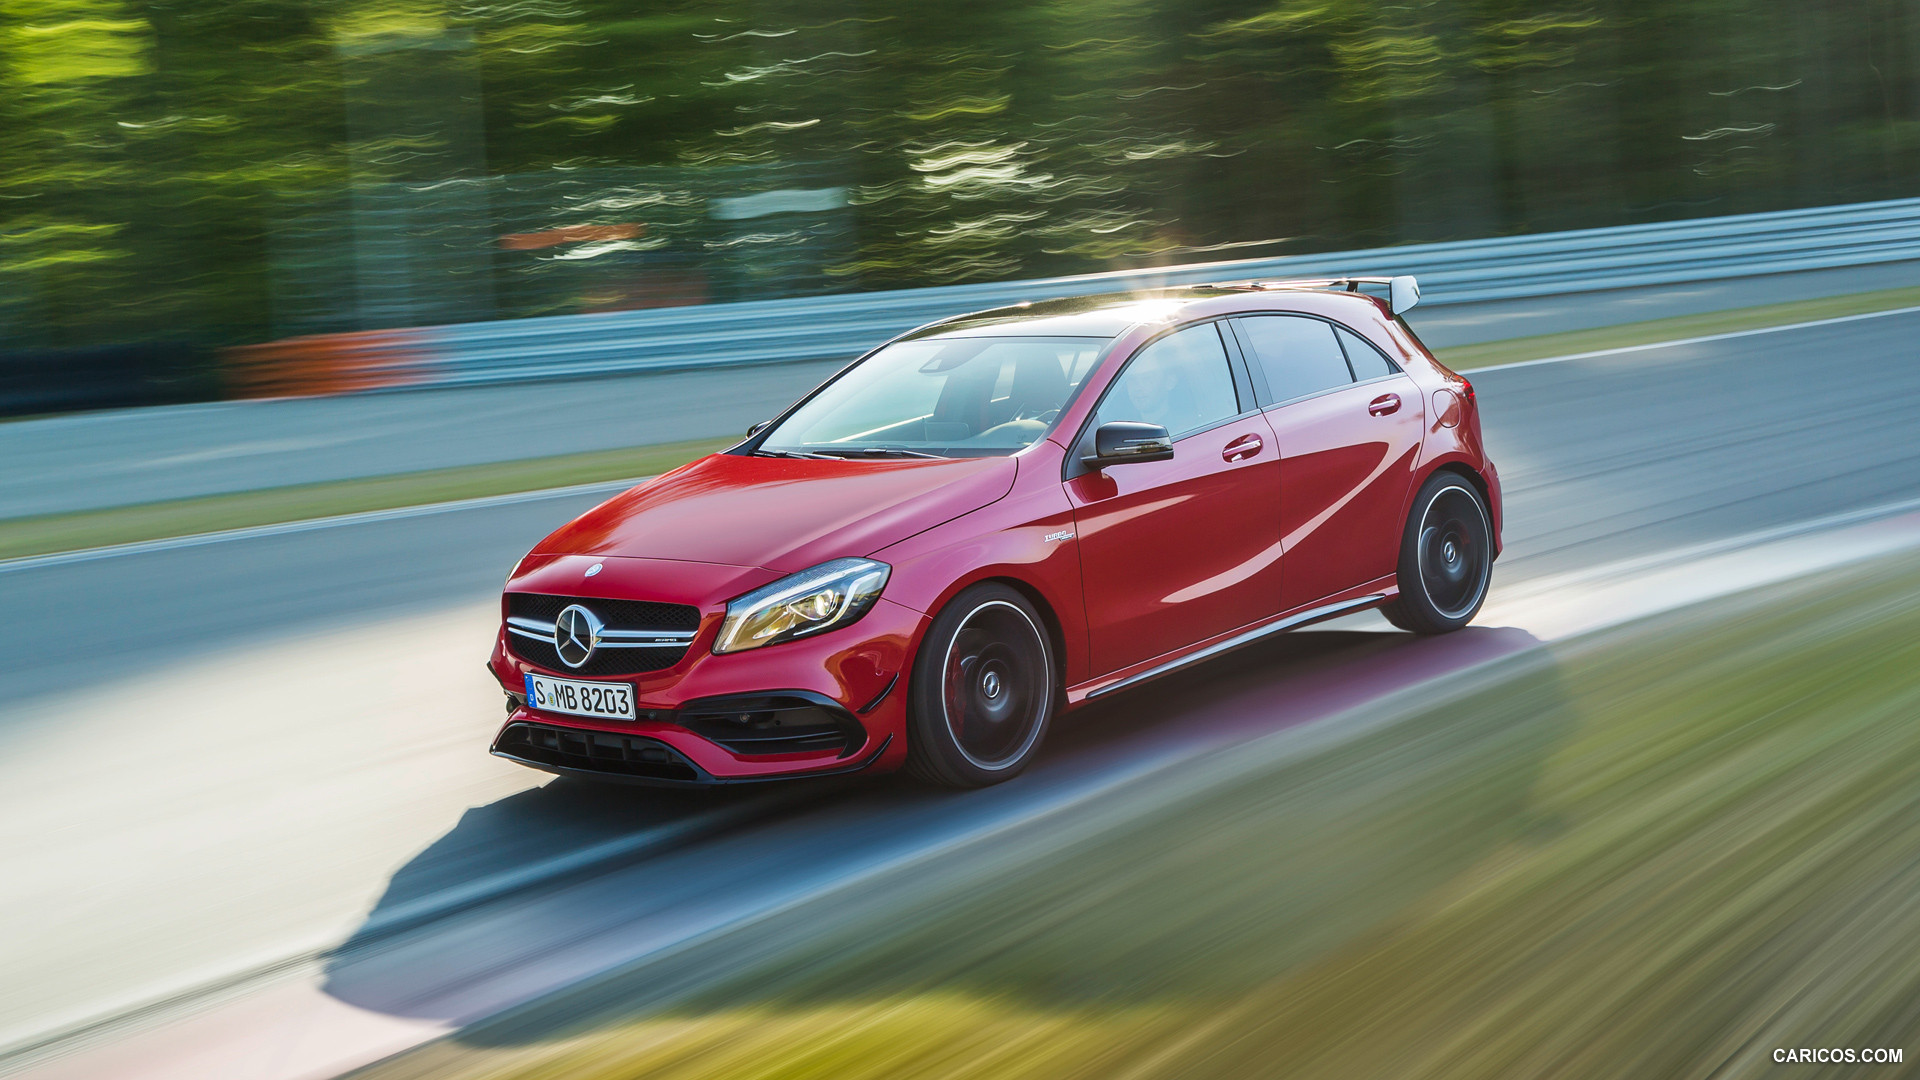 2016 Mercedes-AMG A45 AMG Exclusive (Jupiter Red) - Front, #10 of 15